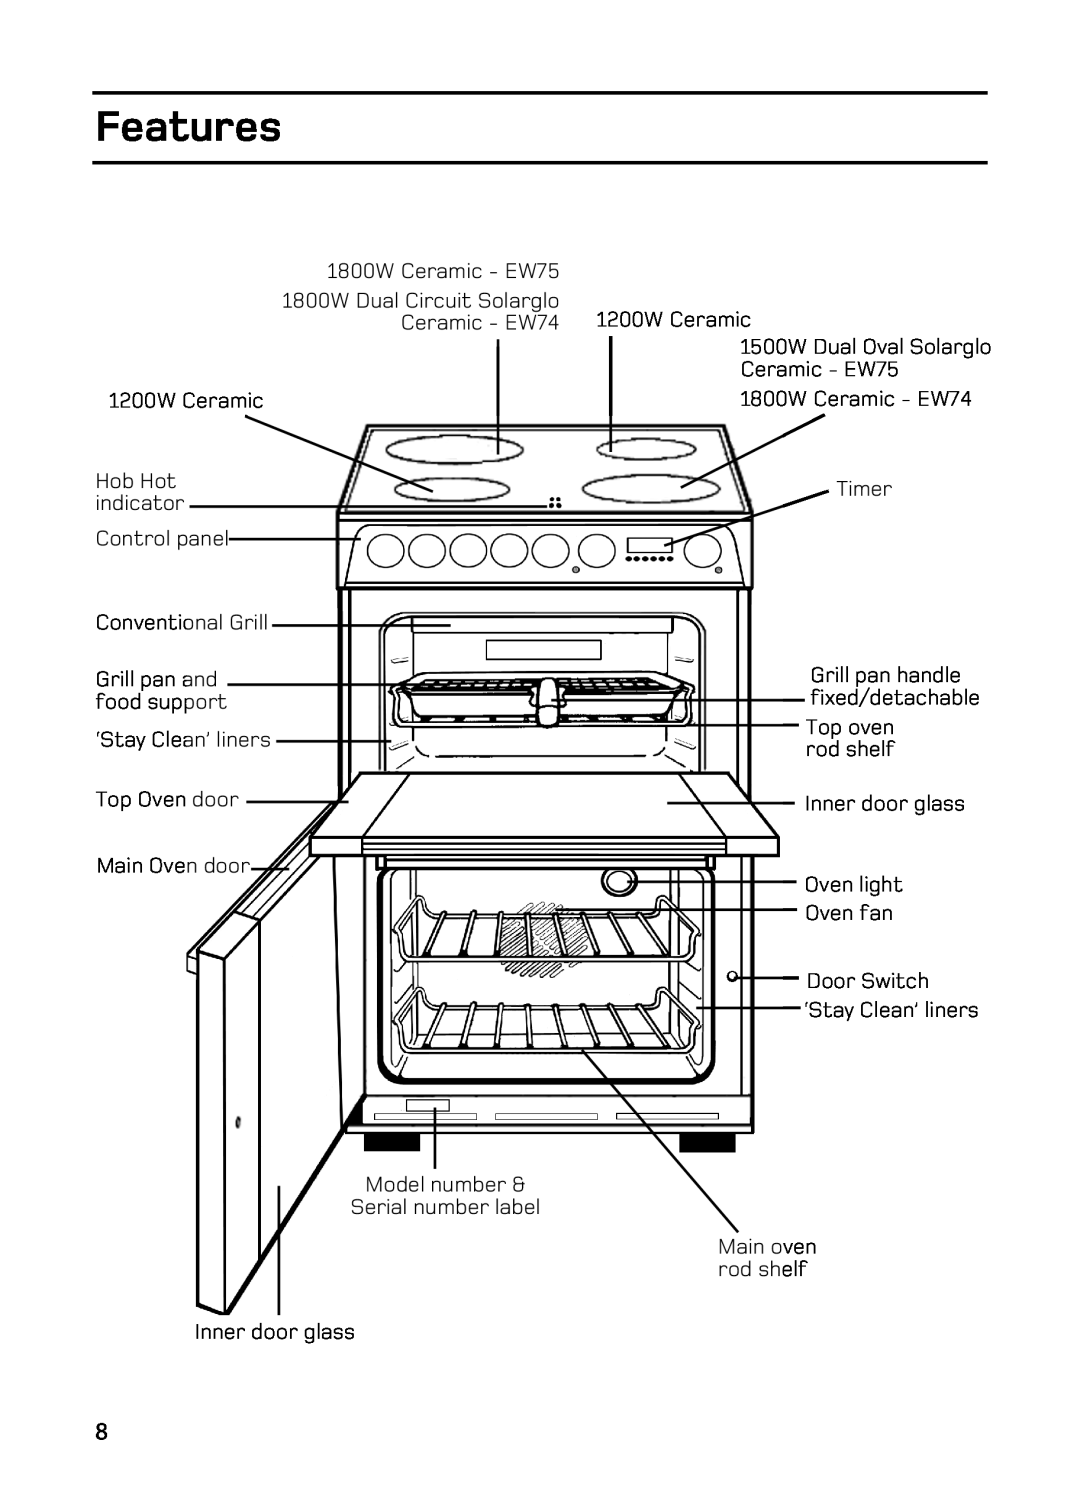 Hotpoint double oven cookers manual Features 